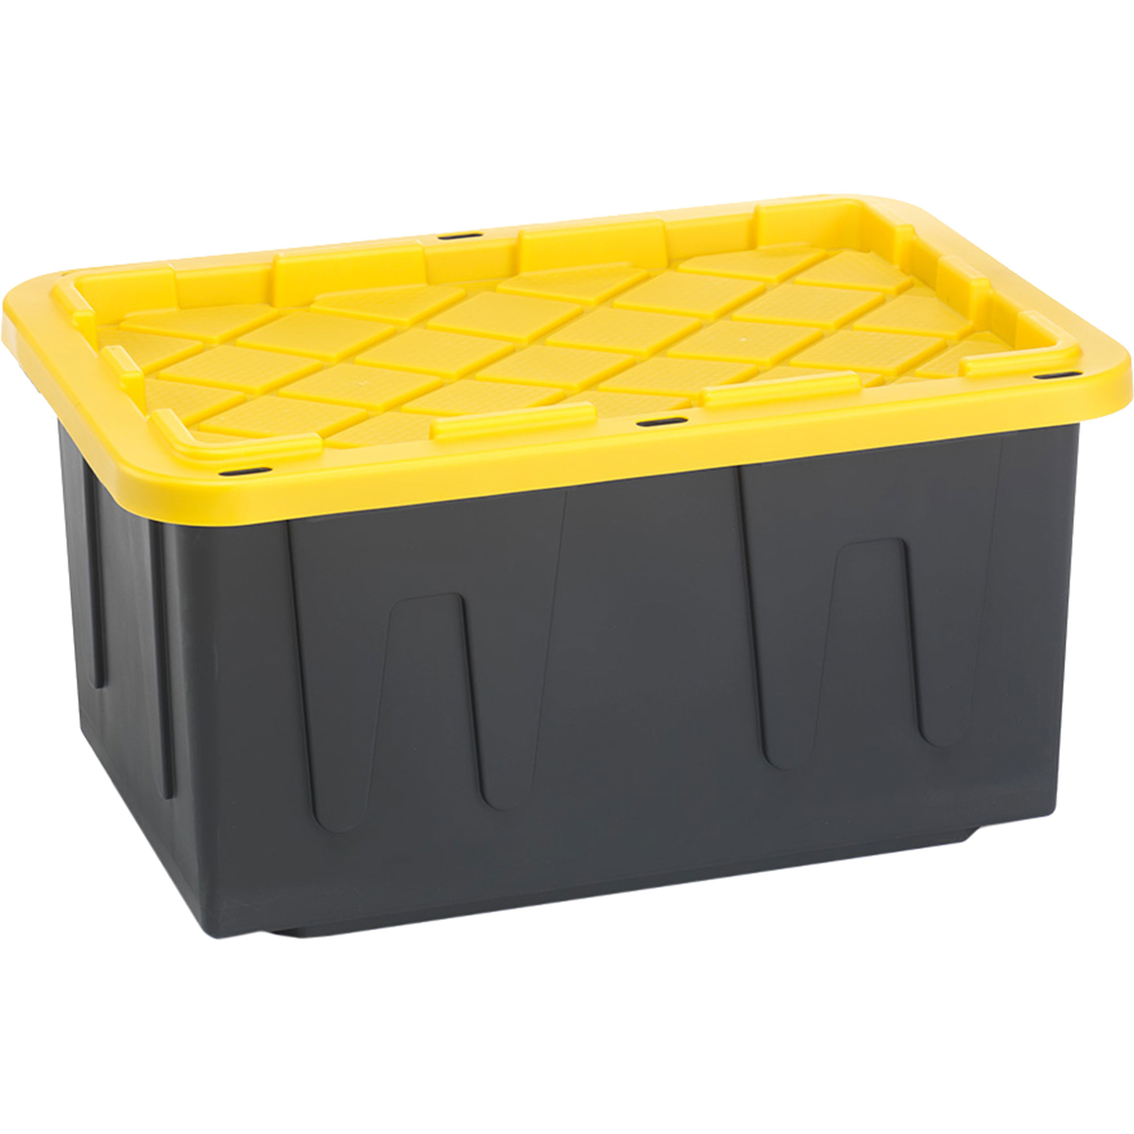 Ticonn Extra Large Storage Totes sale